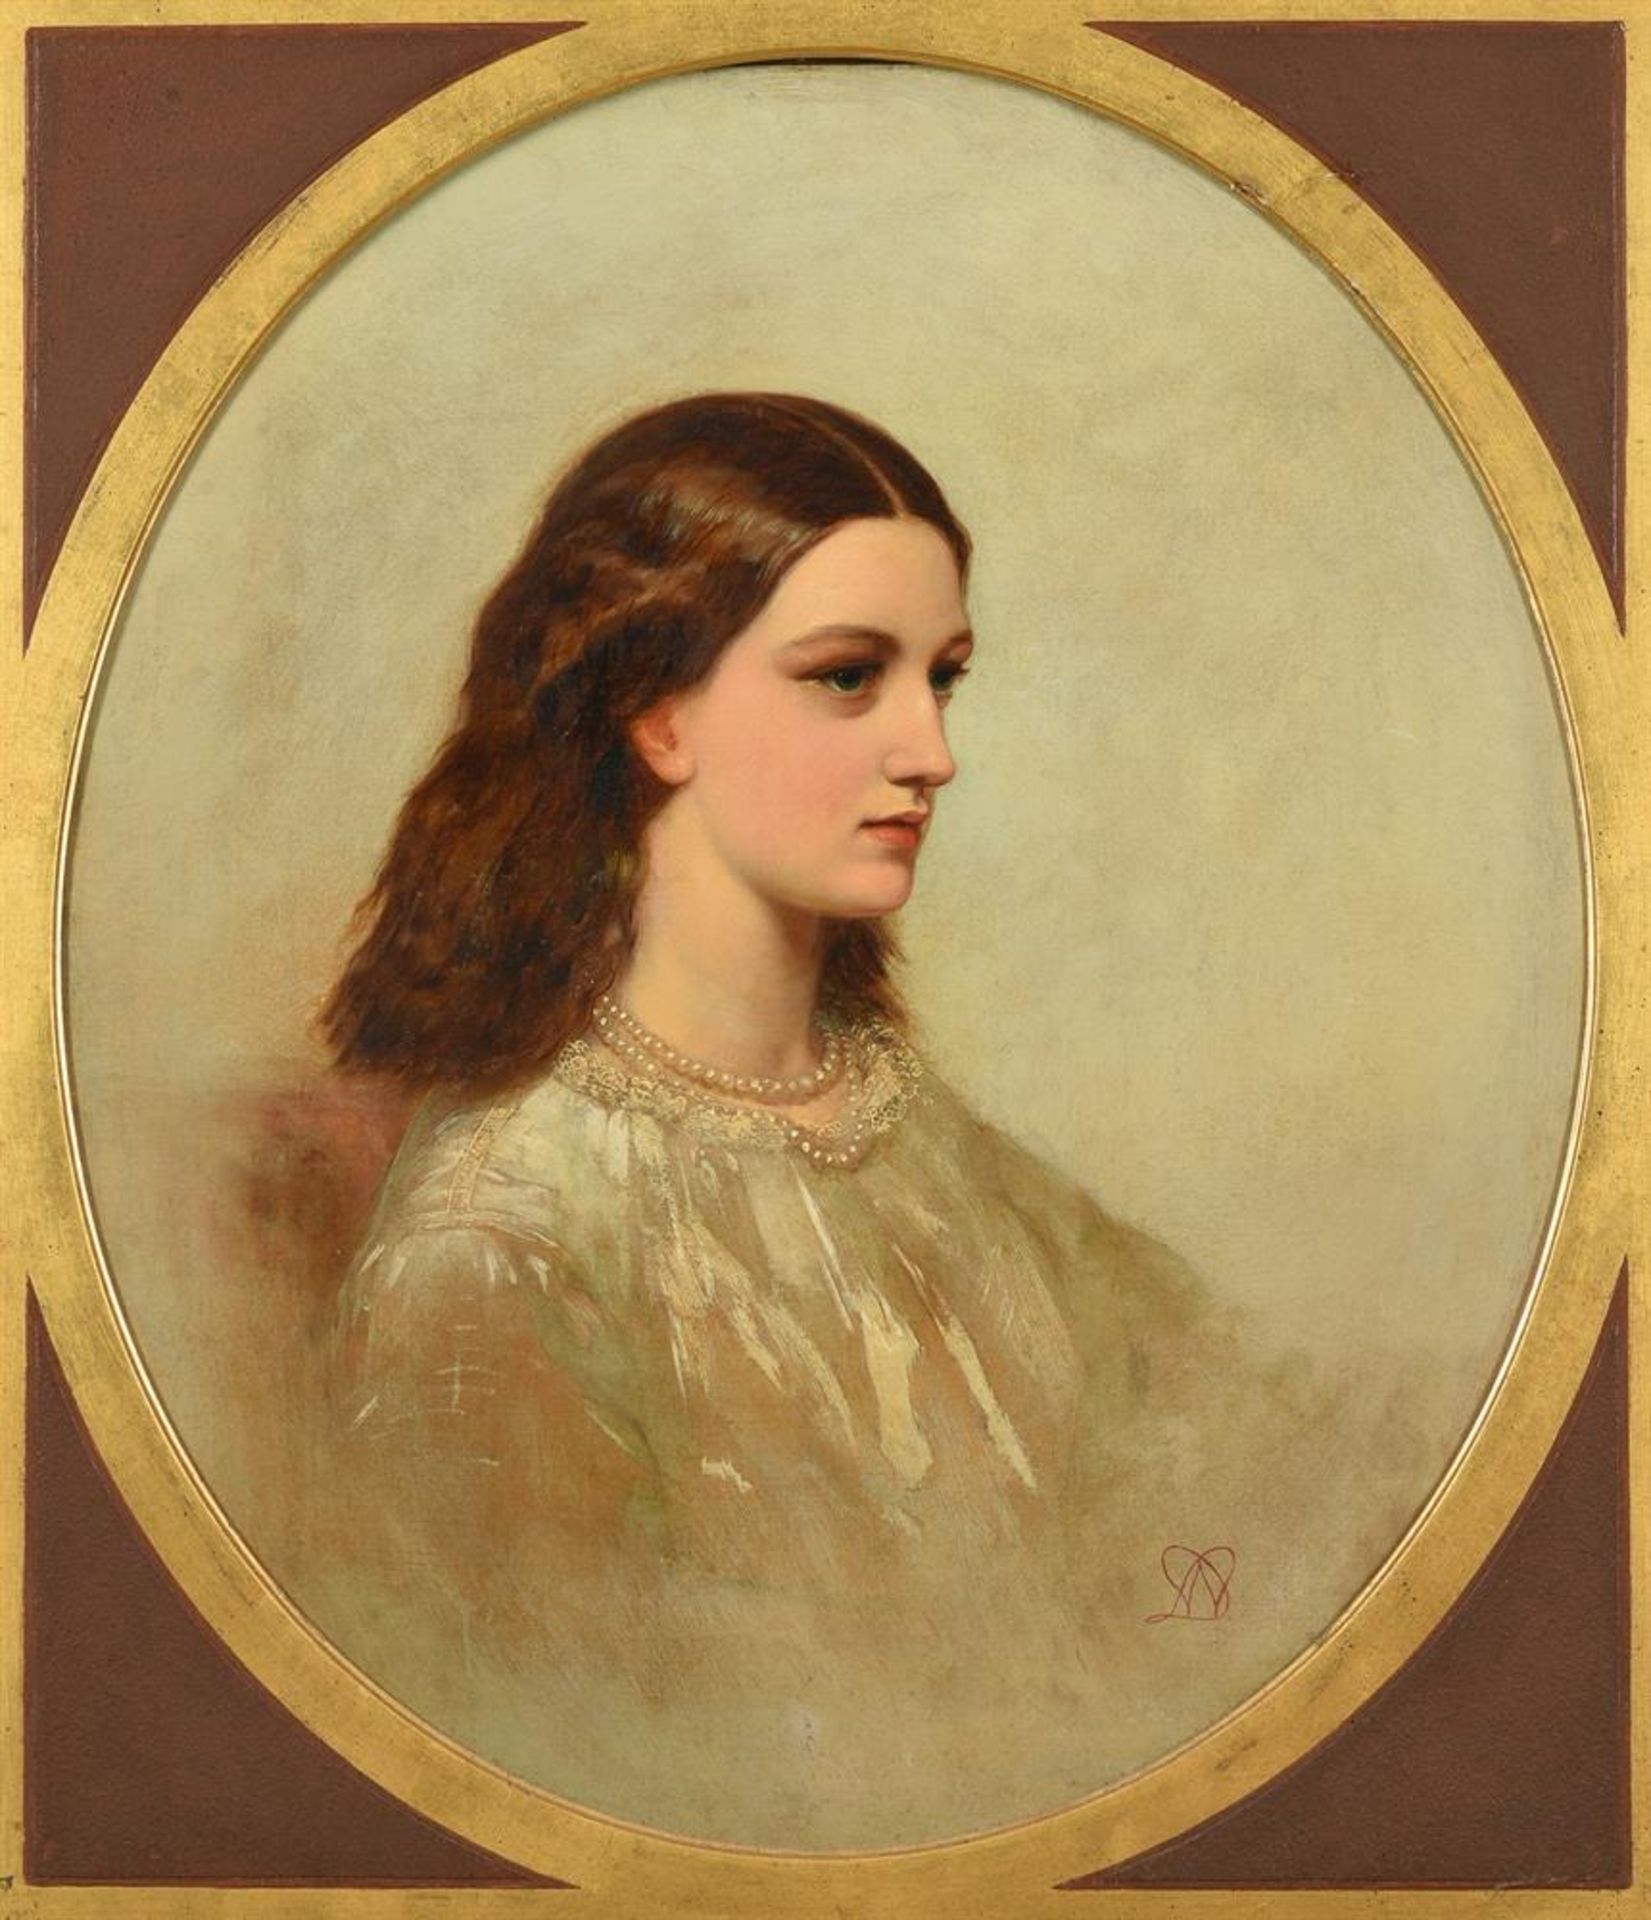 ENGLISH SCHOOL (19TH CENTURY), PORTRAIT OF A GIRL WITH A PEARL NECKLACE, DRESSED IN WHITE - Image 2 of 3